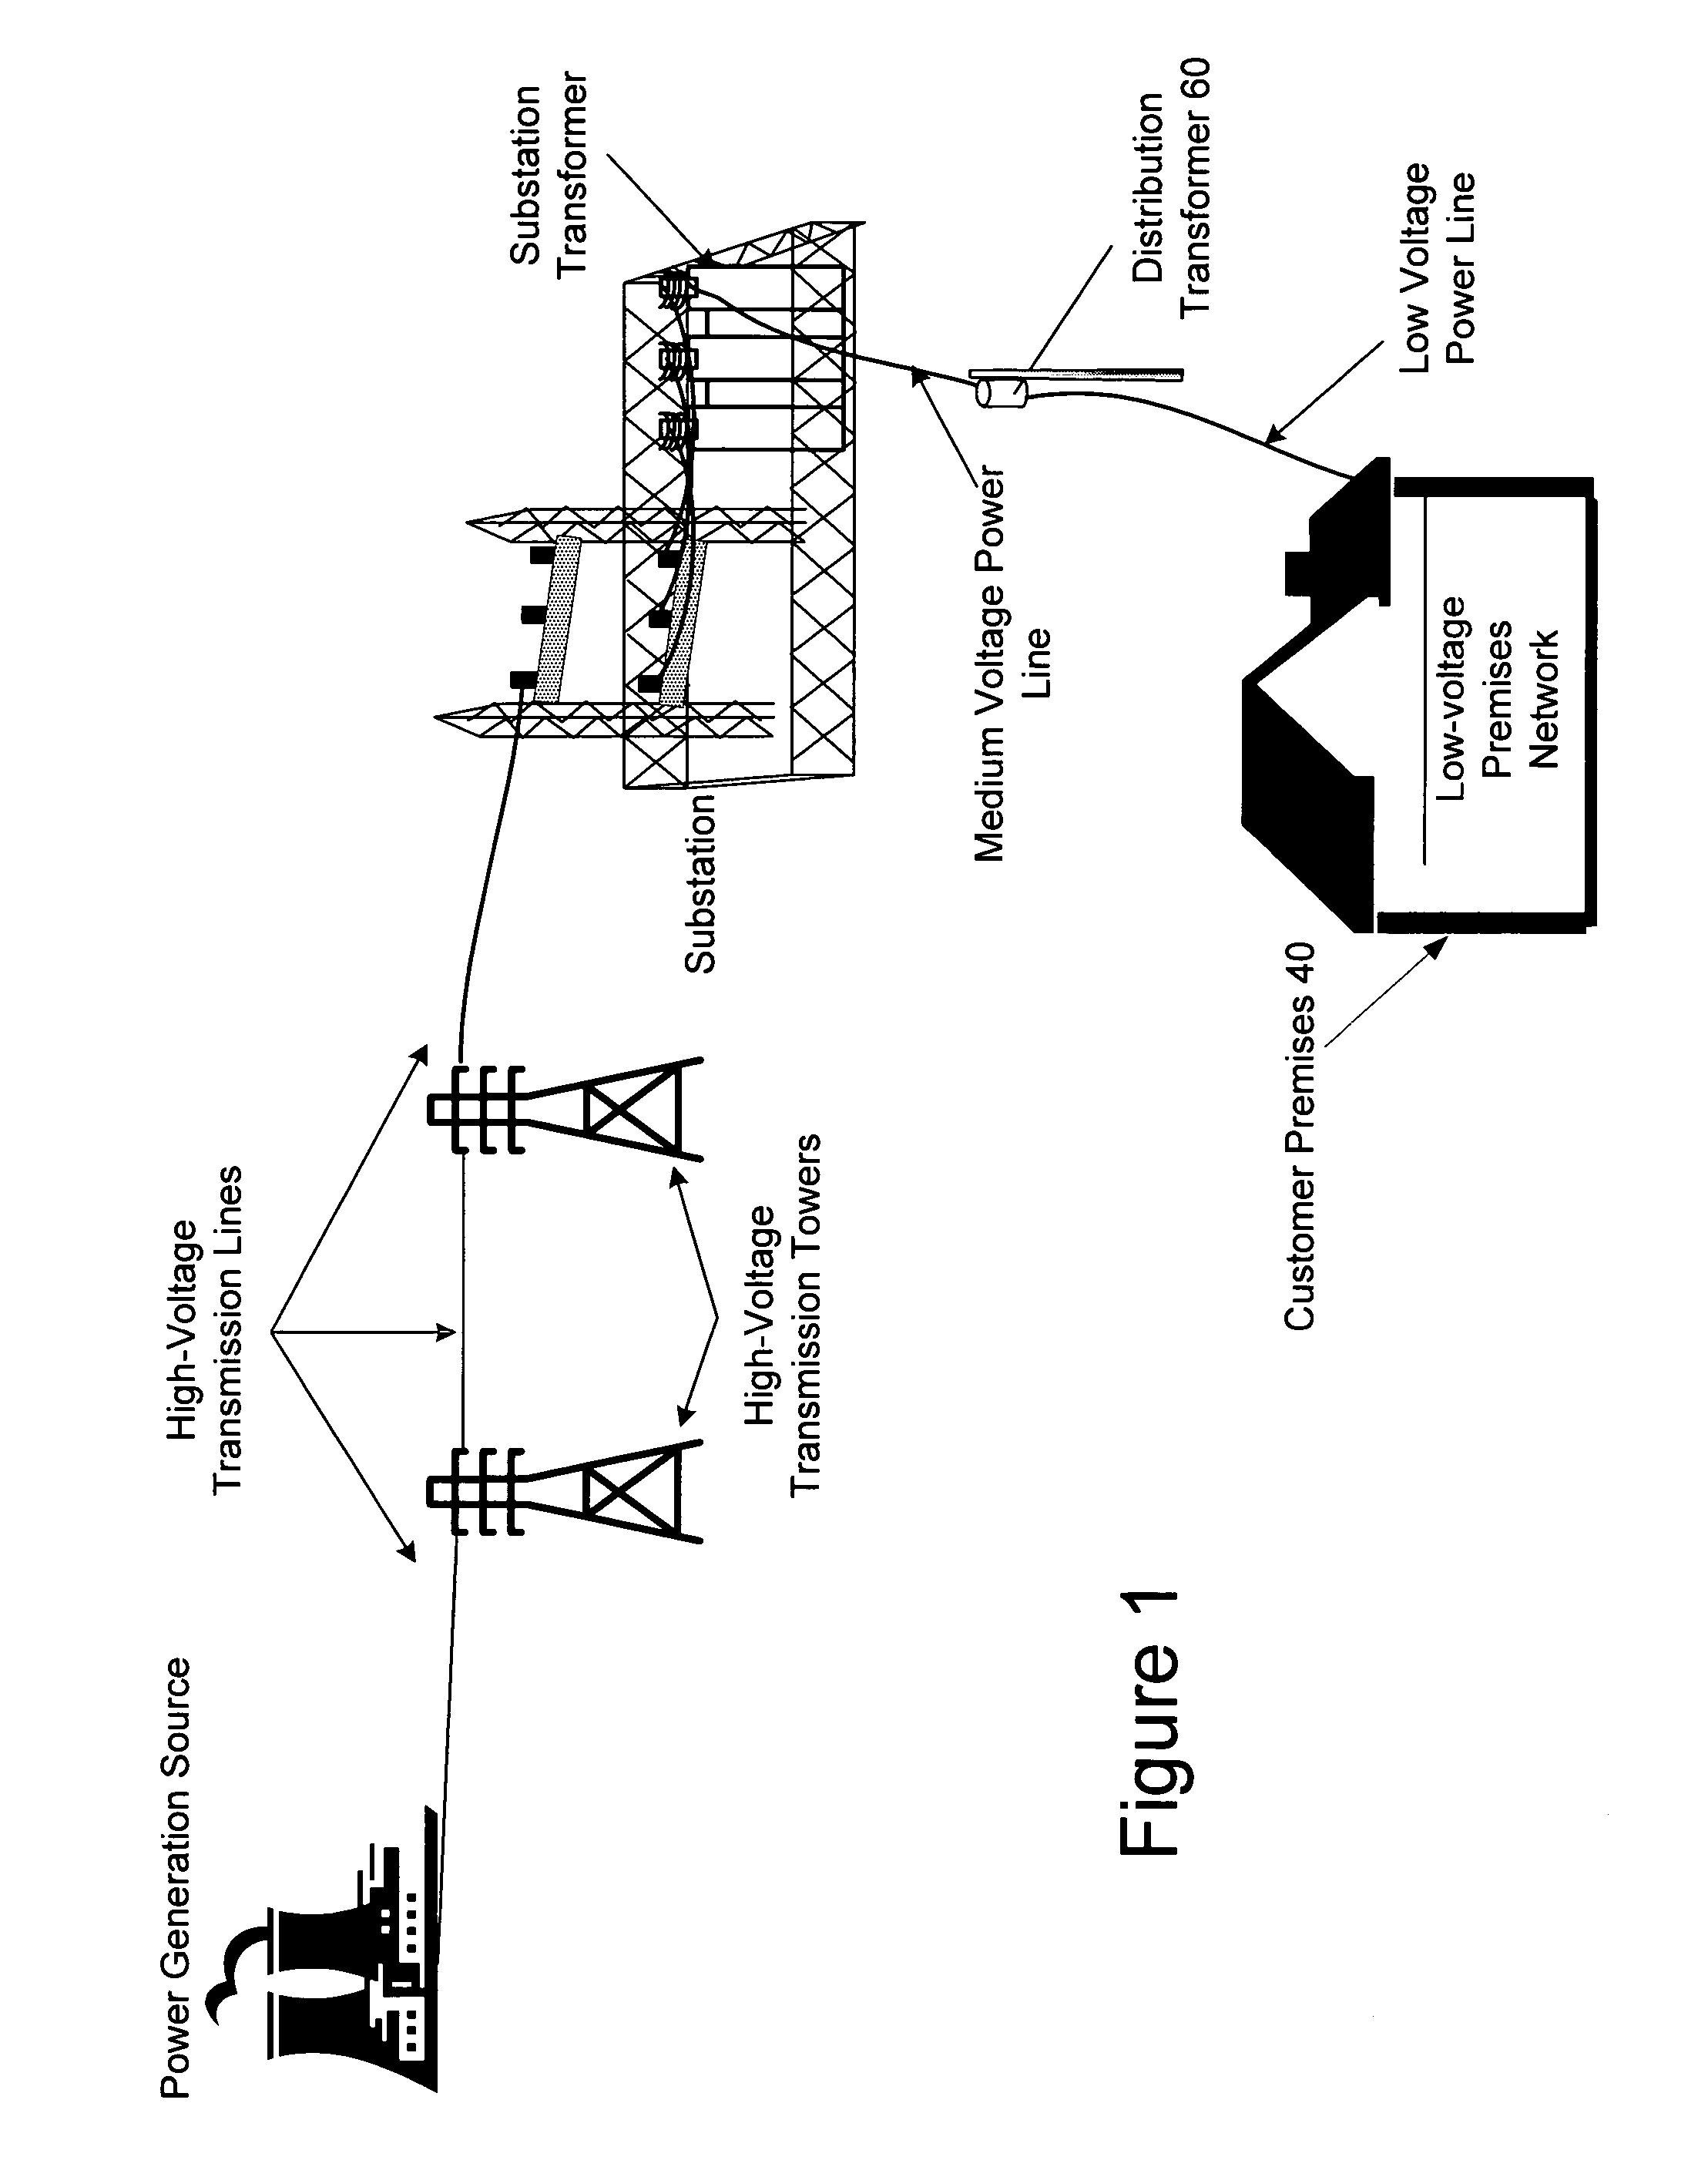 Automated meter reading power line communication system and method